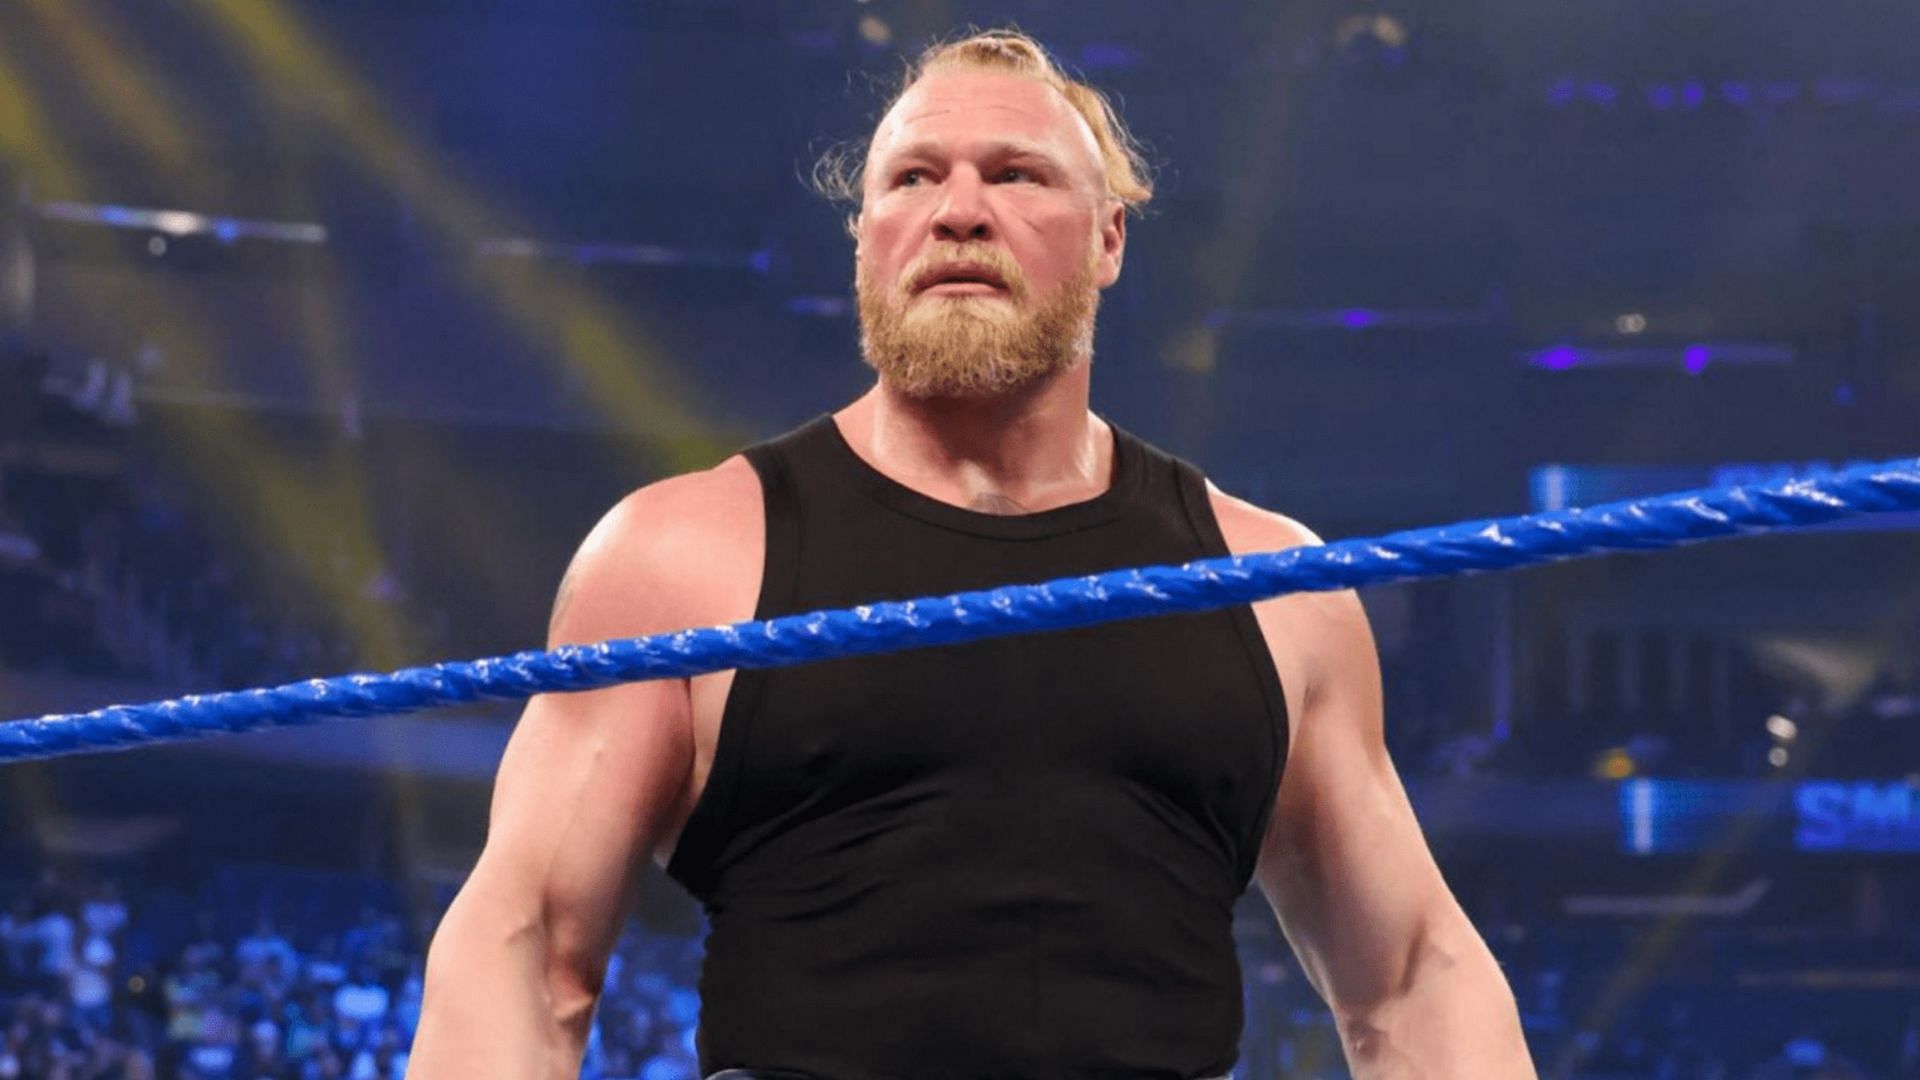 Brock Lesnar is scheduled to compete at WWE Night of Champions